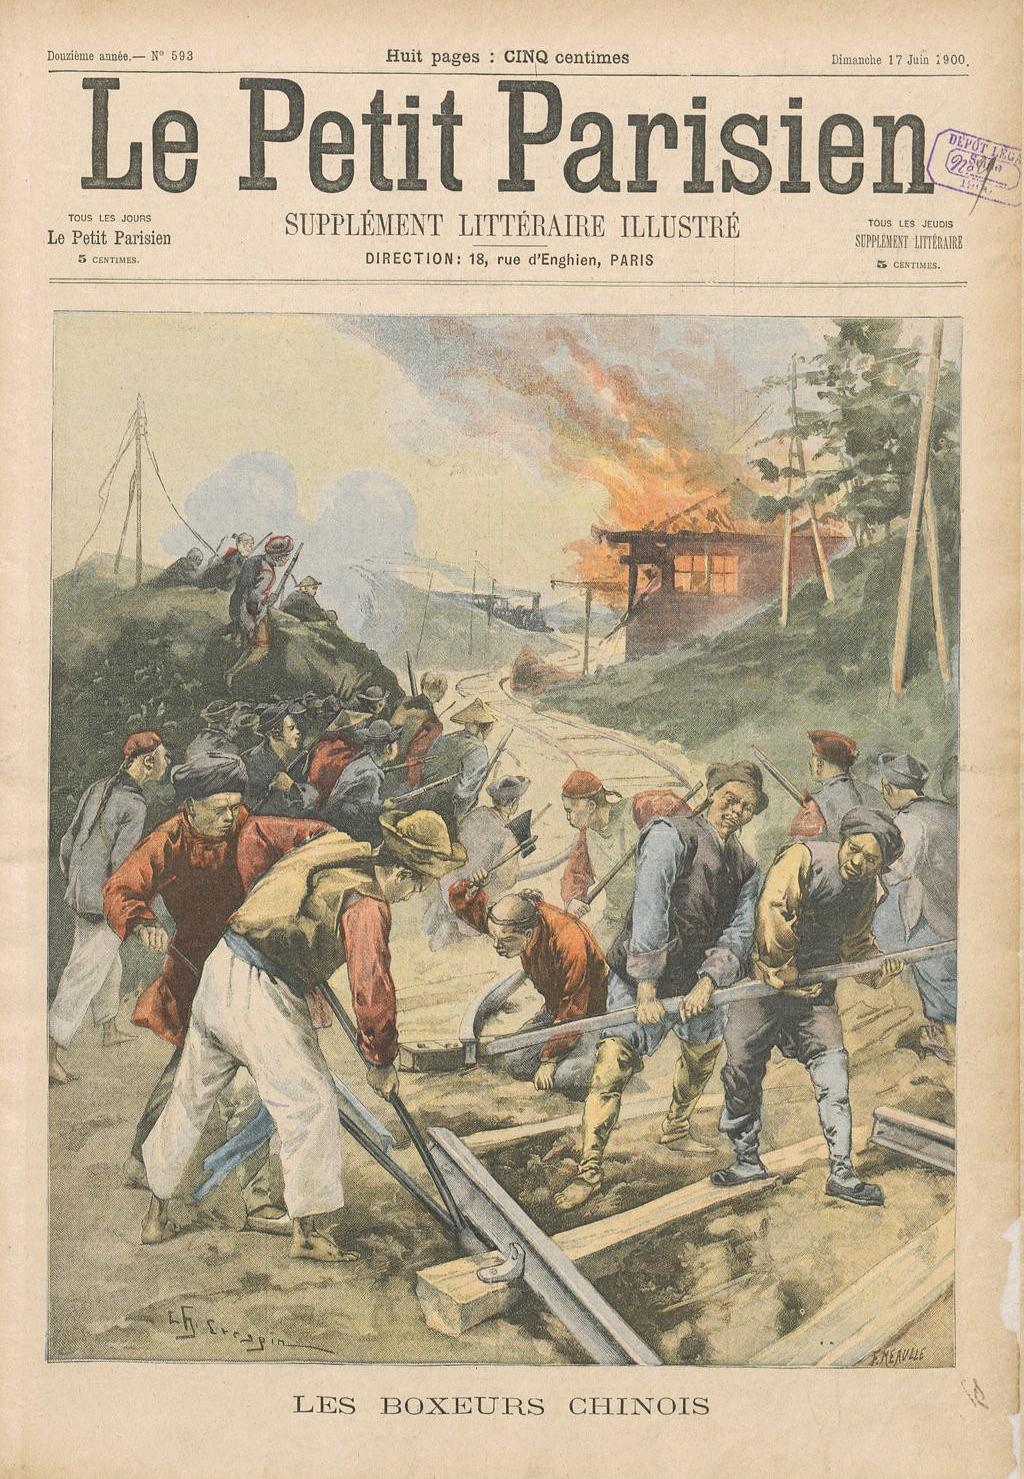 Boxers destroy railway tracks in this cover illustration of a French periodical.